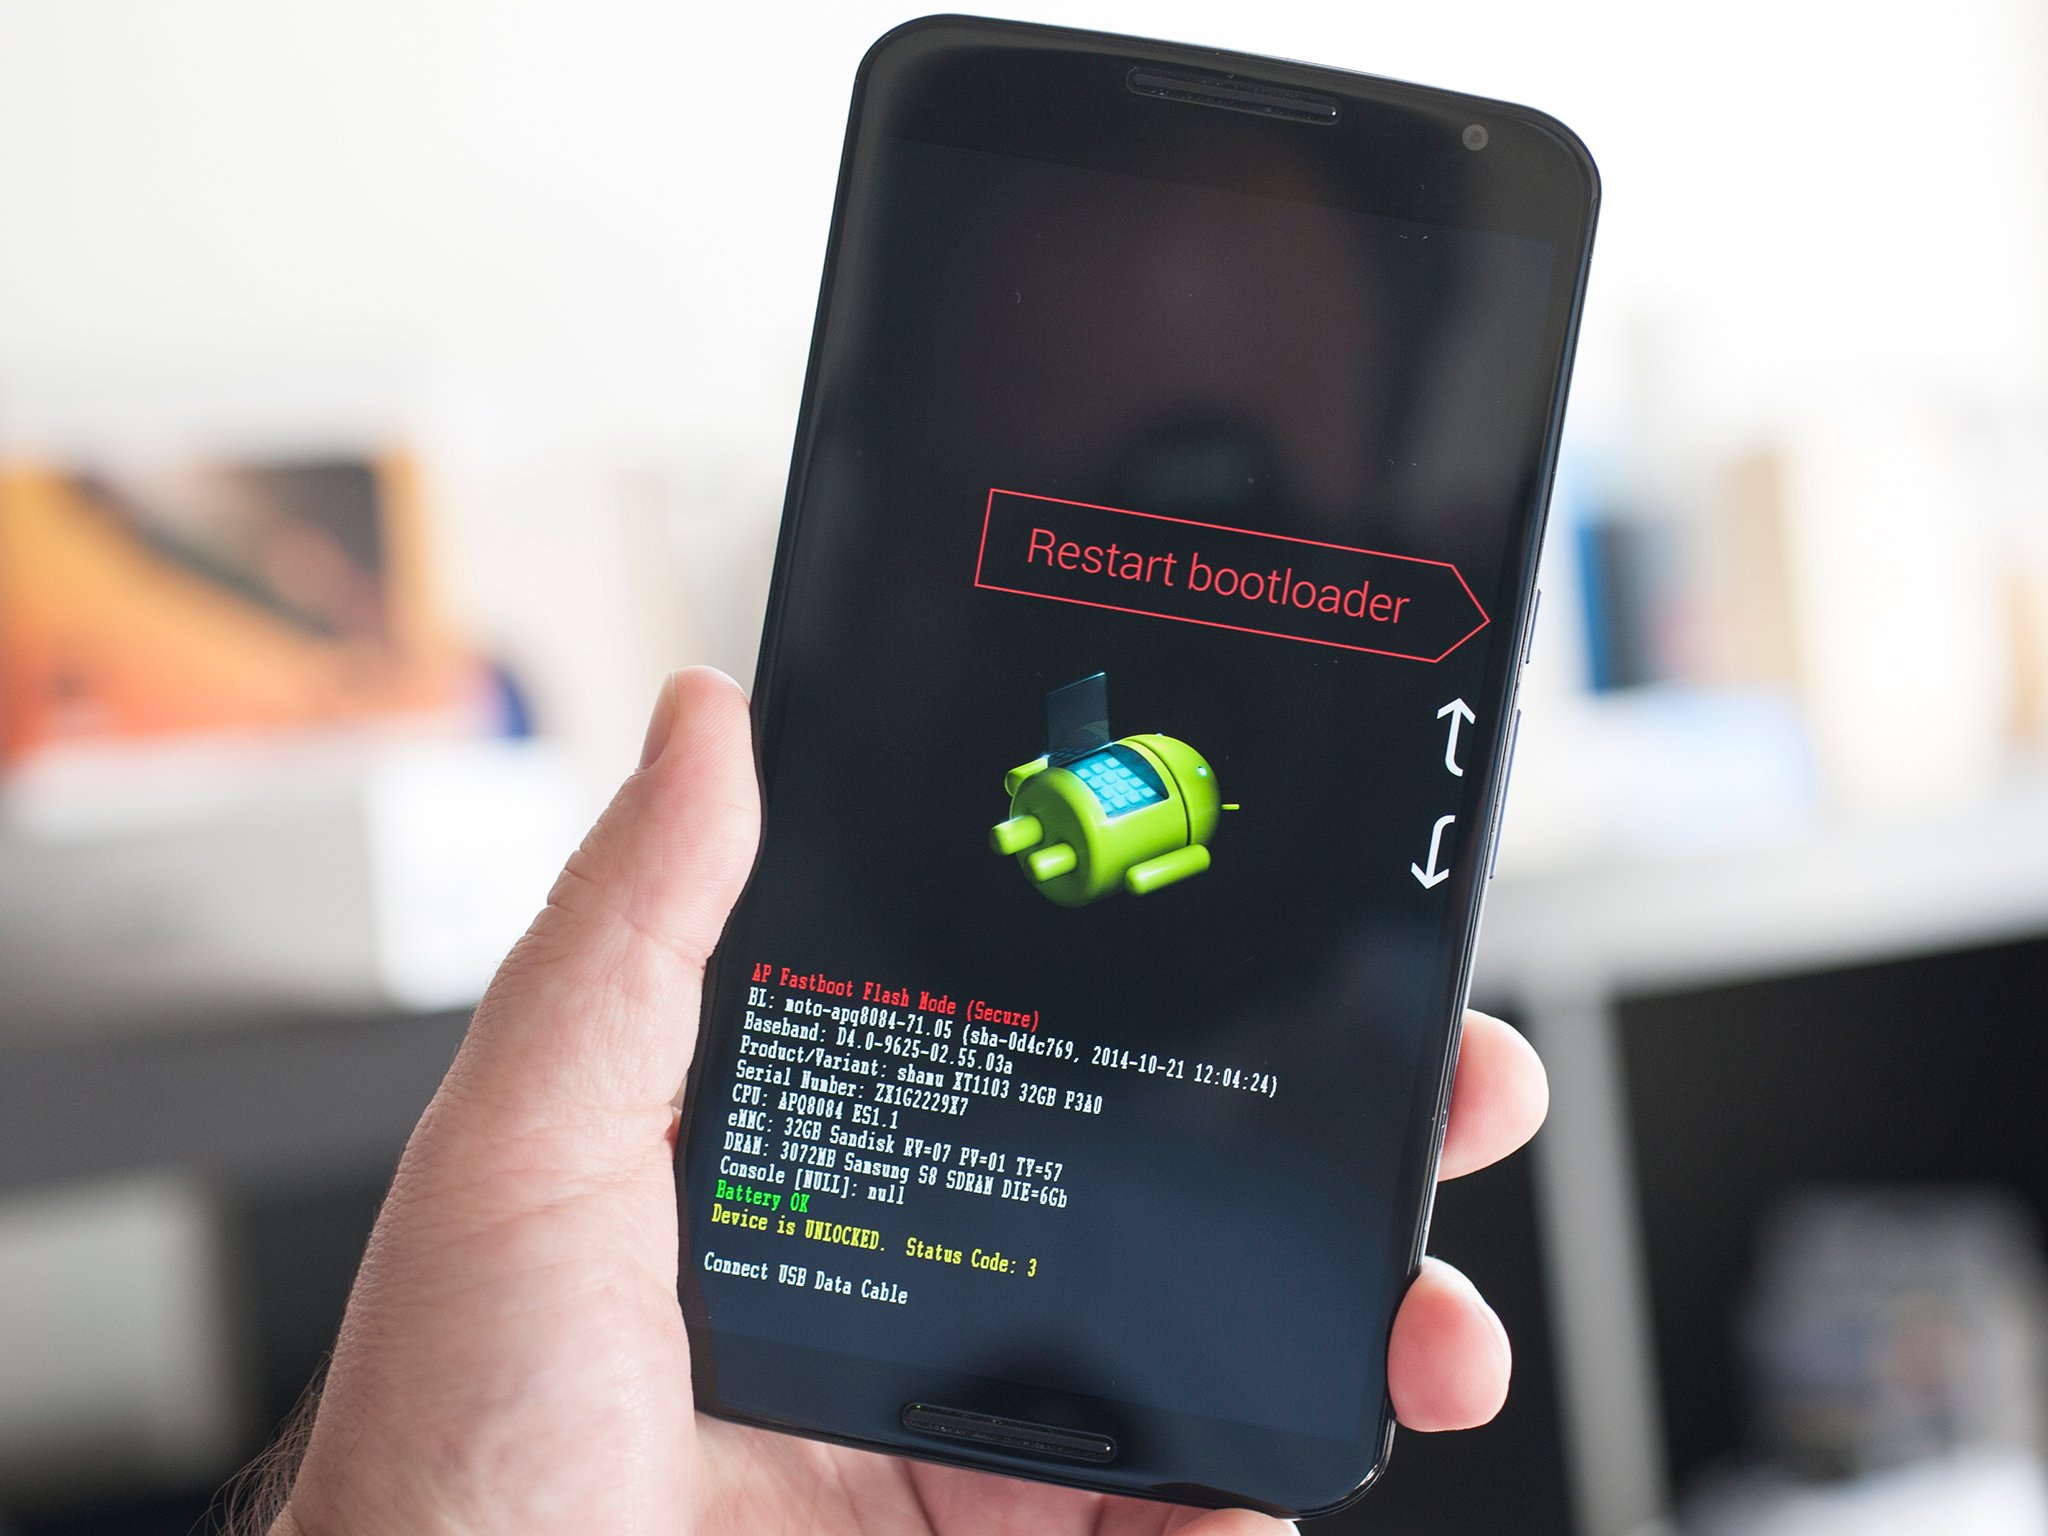 Android 5.0.1 factory images for Nexus 6 and Nexus 4 released